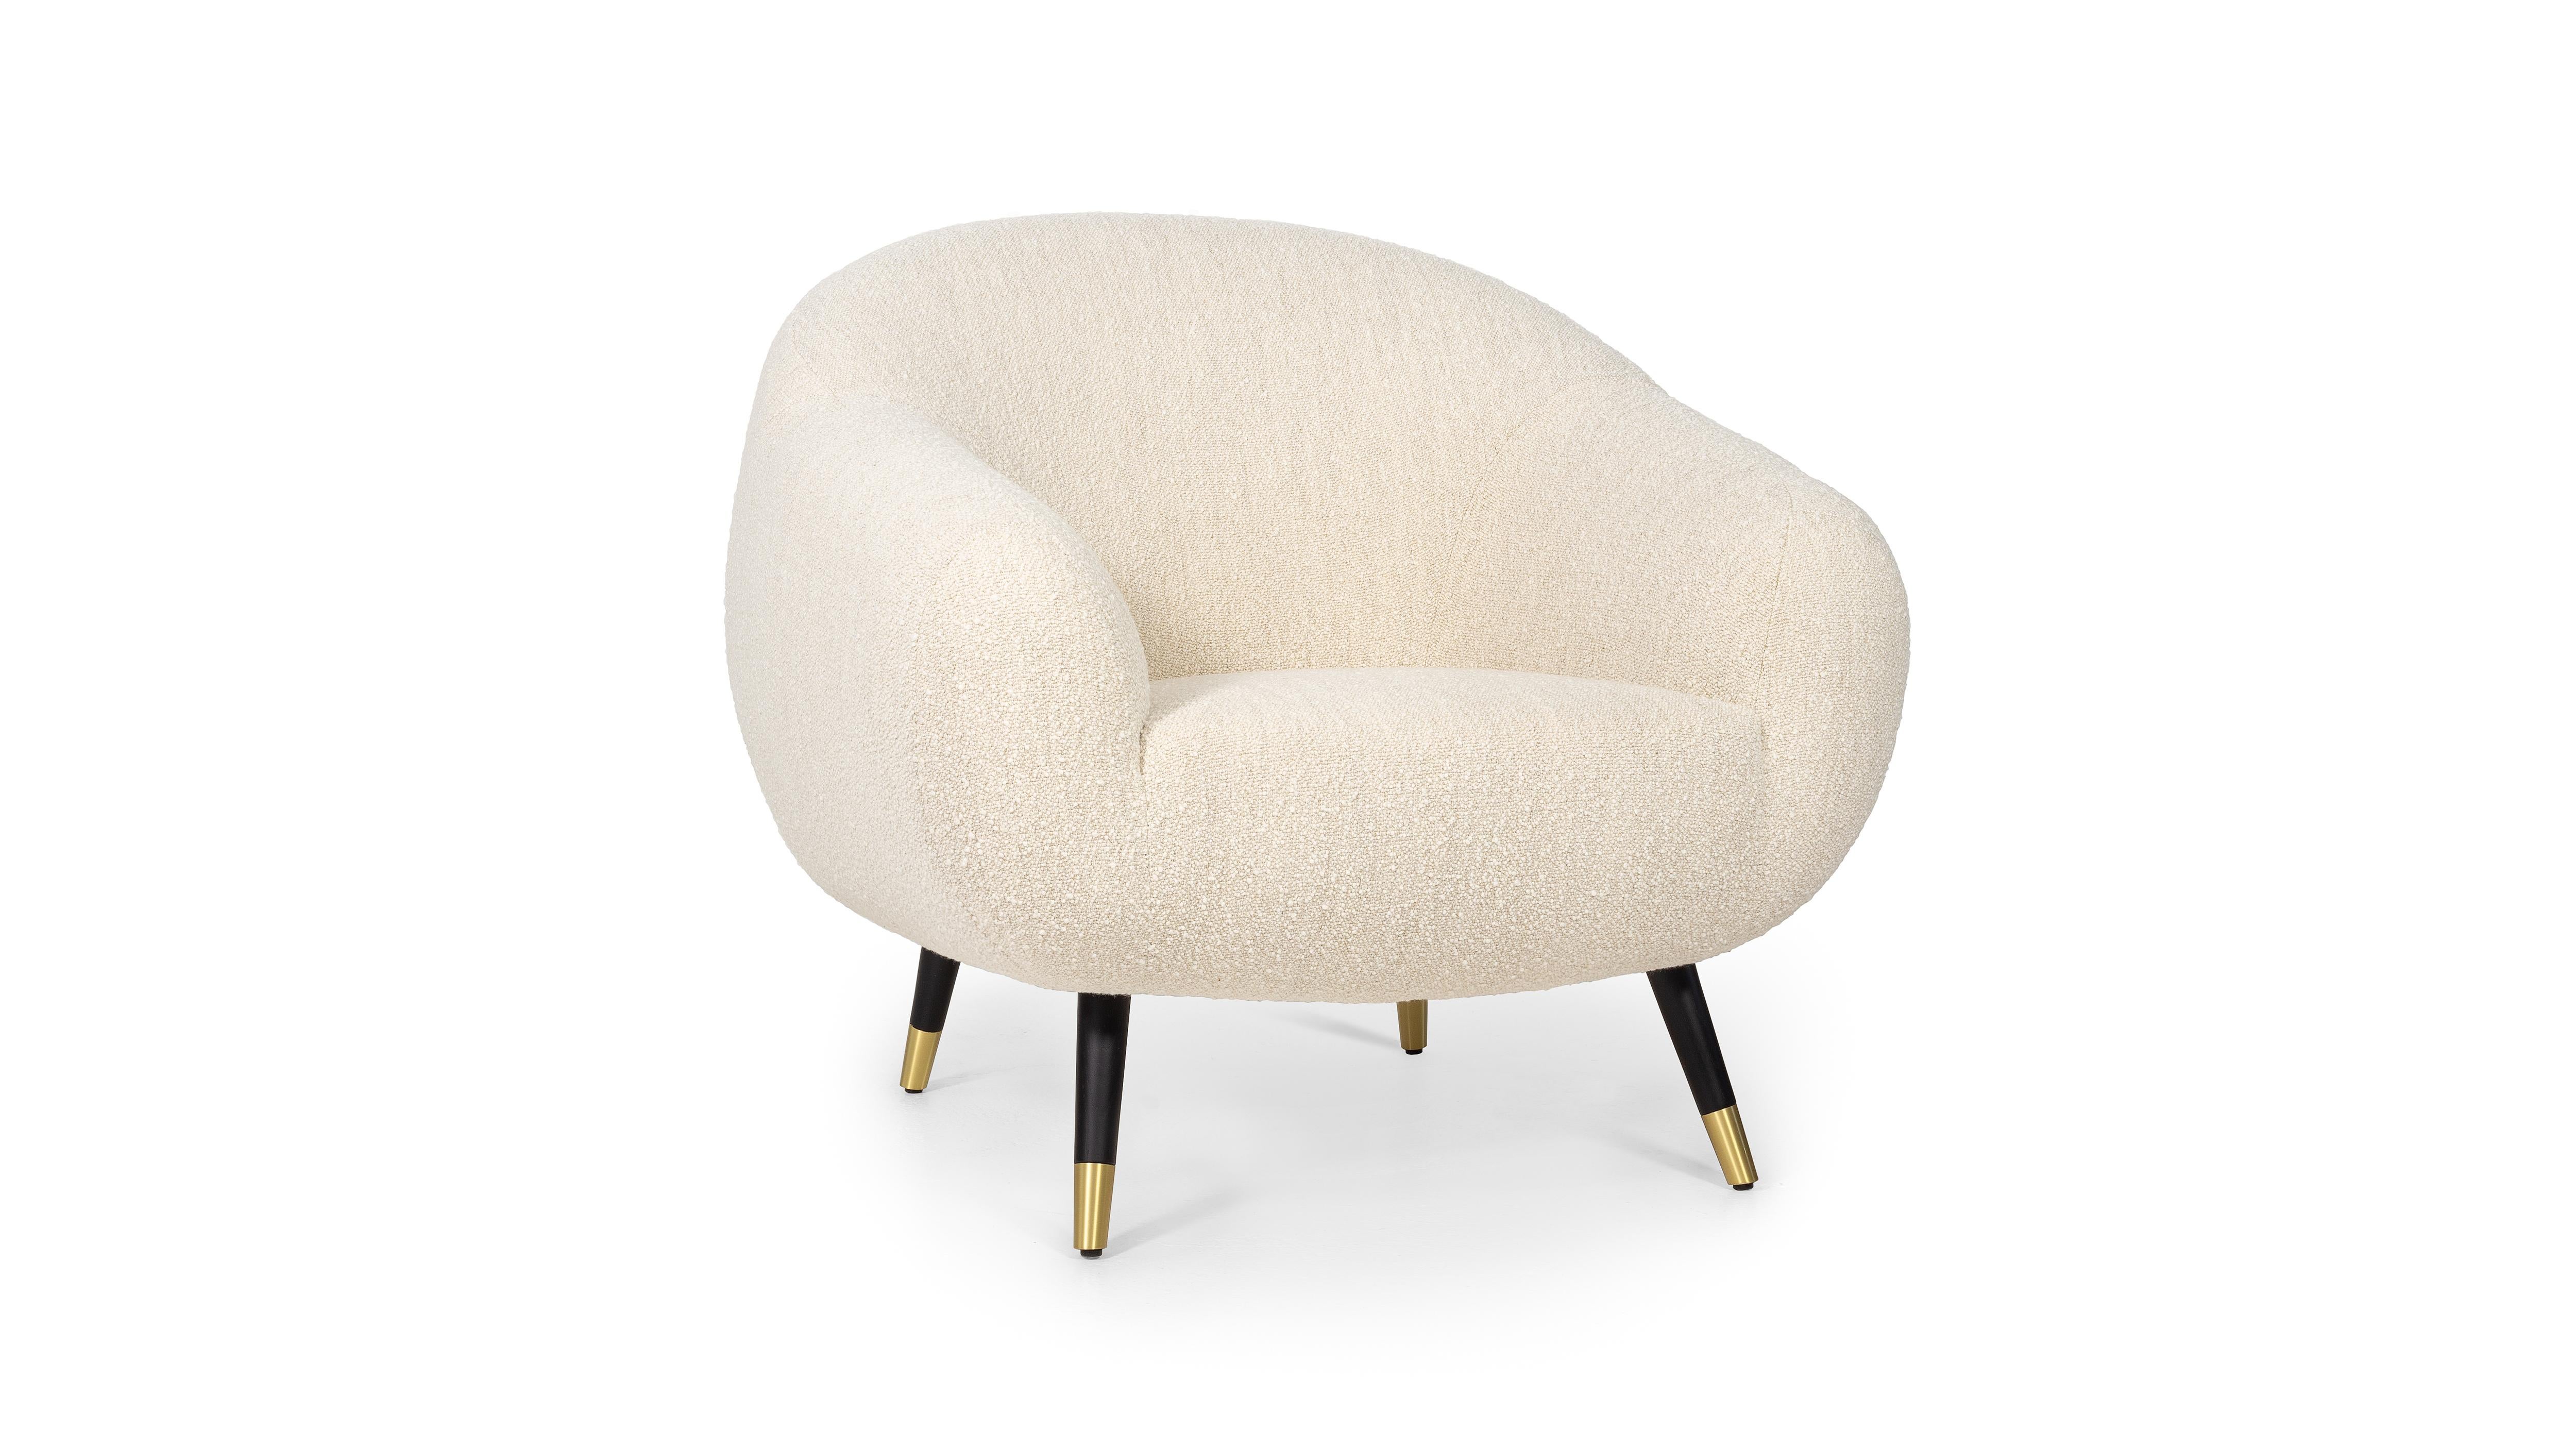 Niemeyer Brass Armchair by InsidherLand
Dimensions: D 92 x W 94 x H 86 cm.
Materials: Dark oak, brushed brass, InsidherLand Woollen Ref. 1 fabric.
32 kg.
Available in different fabrics.

The Niemeyer armchair is named after the Brazilian Architect